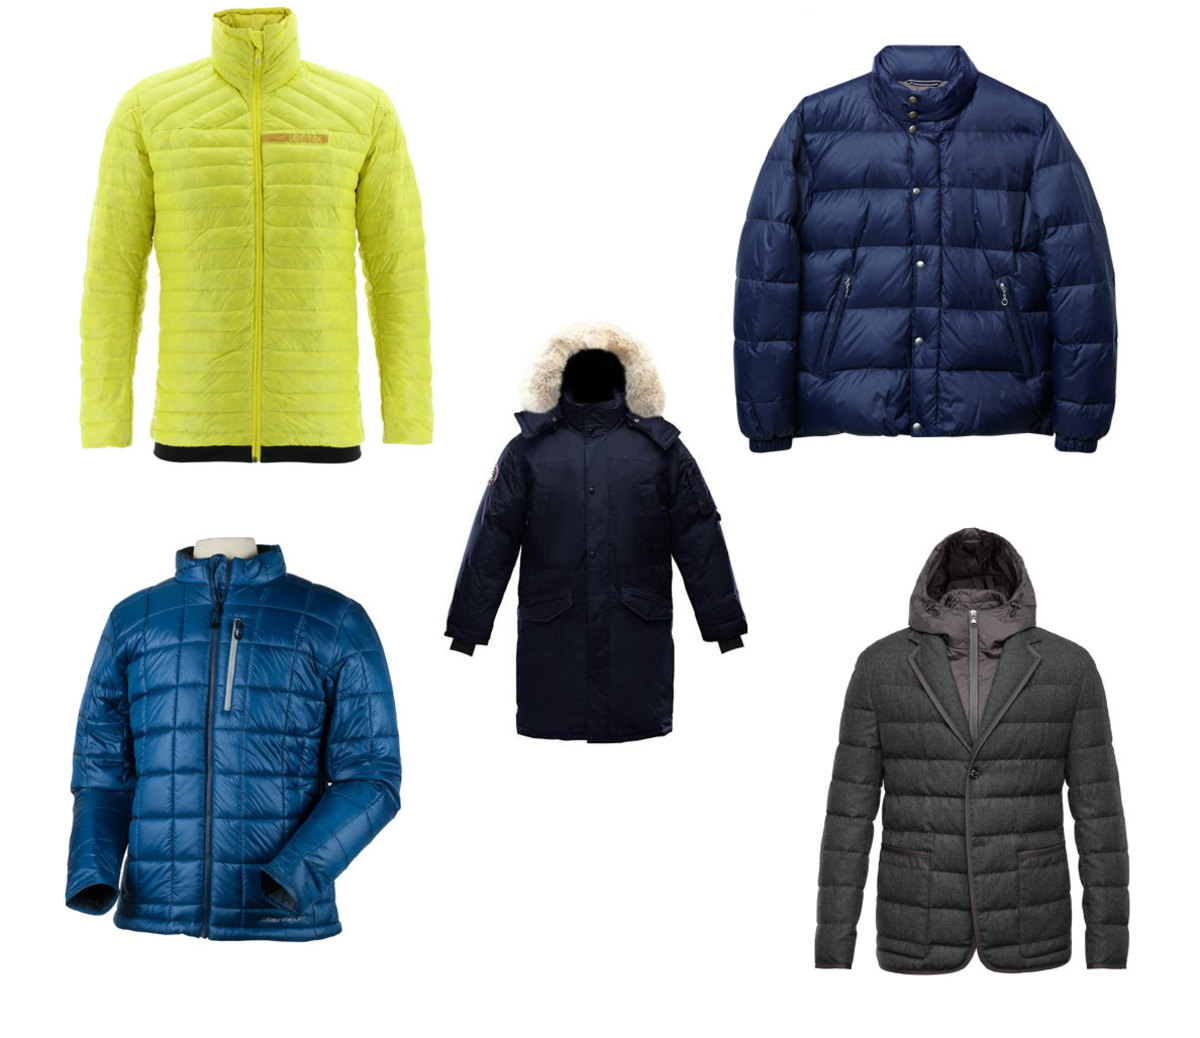 My favorite Lululemon puffer jacket is $120 off right now in early